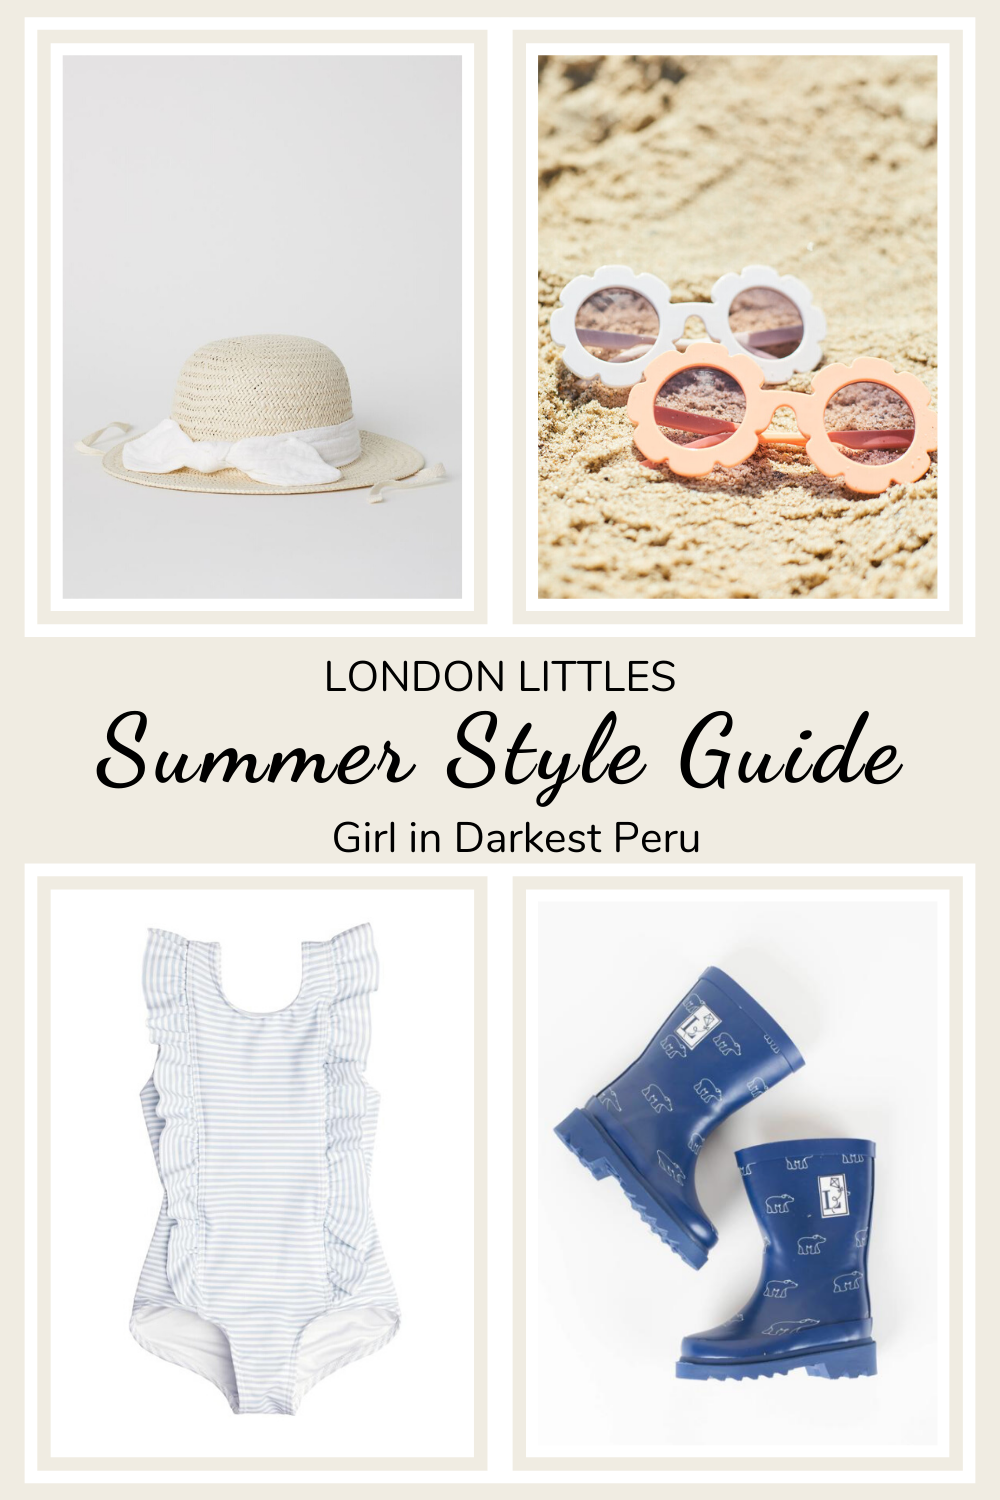 summer style guide with beach wear from London Littles